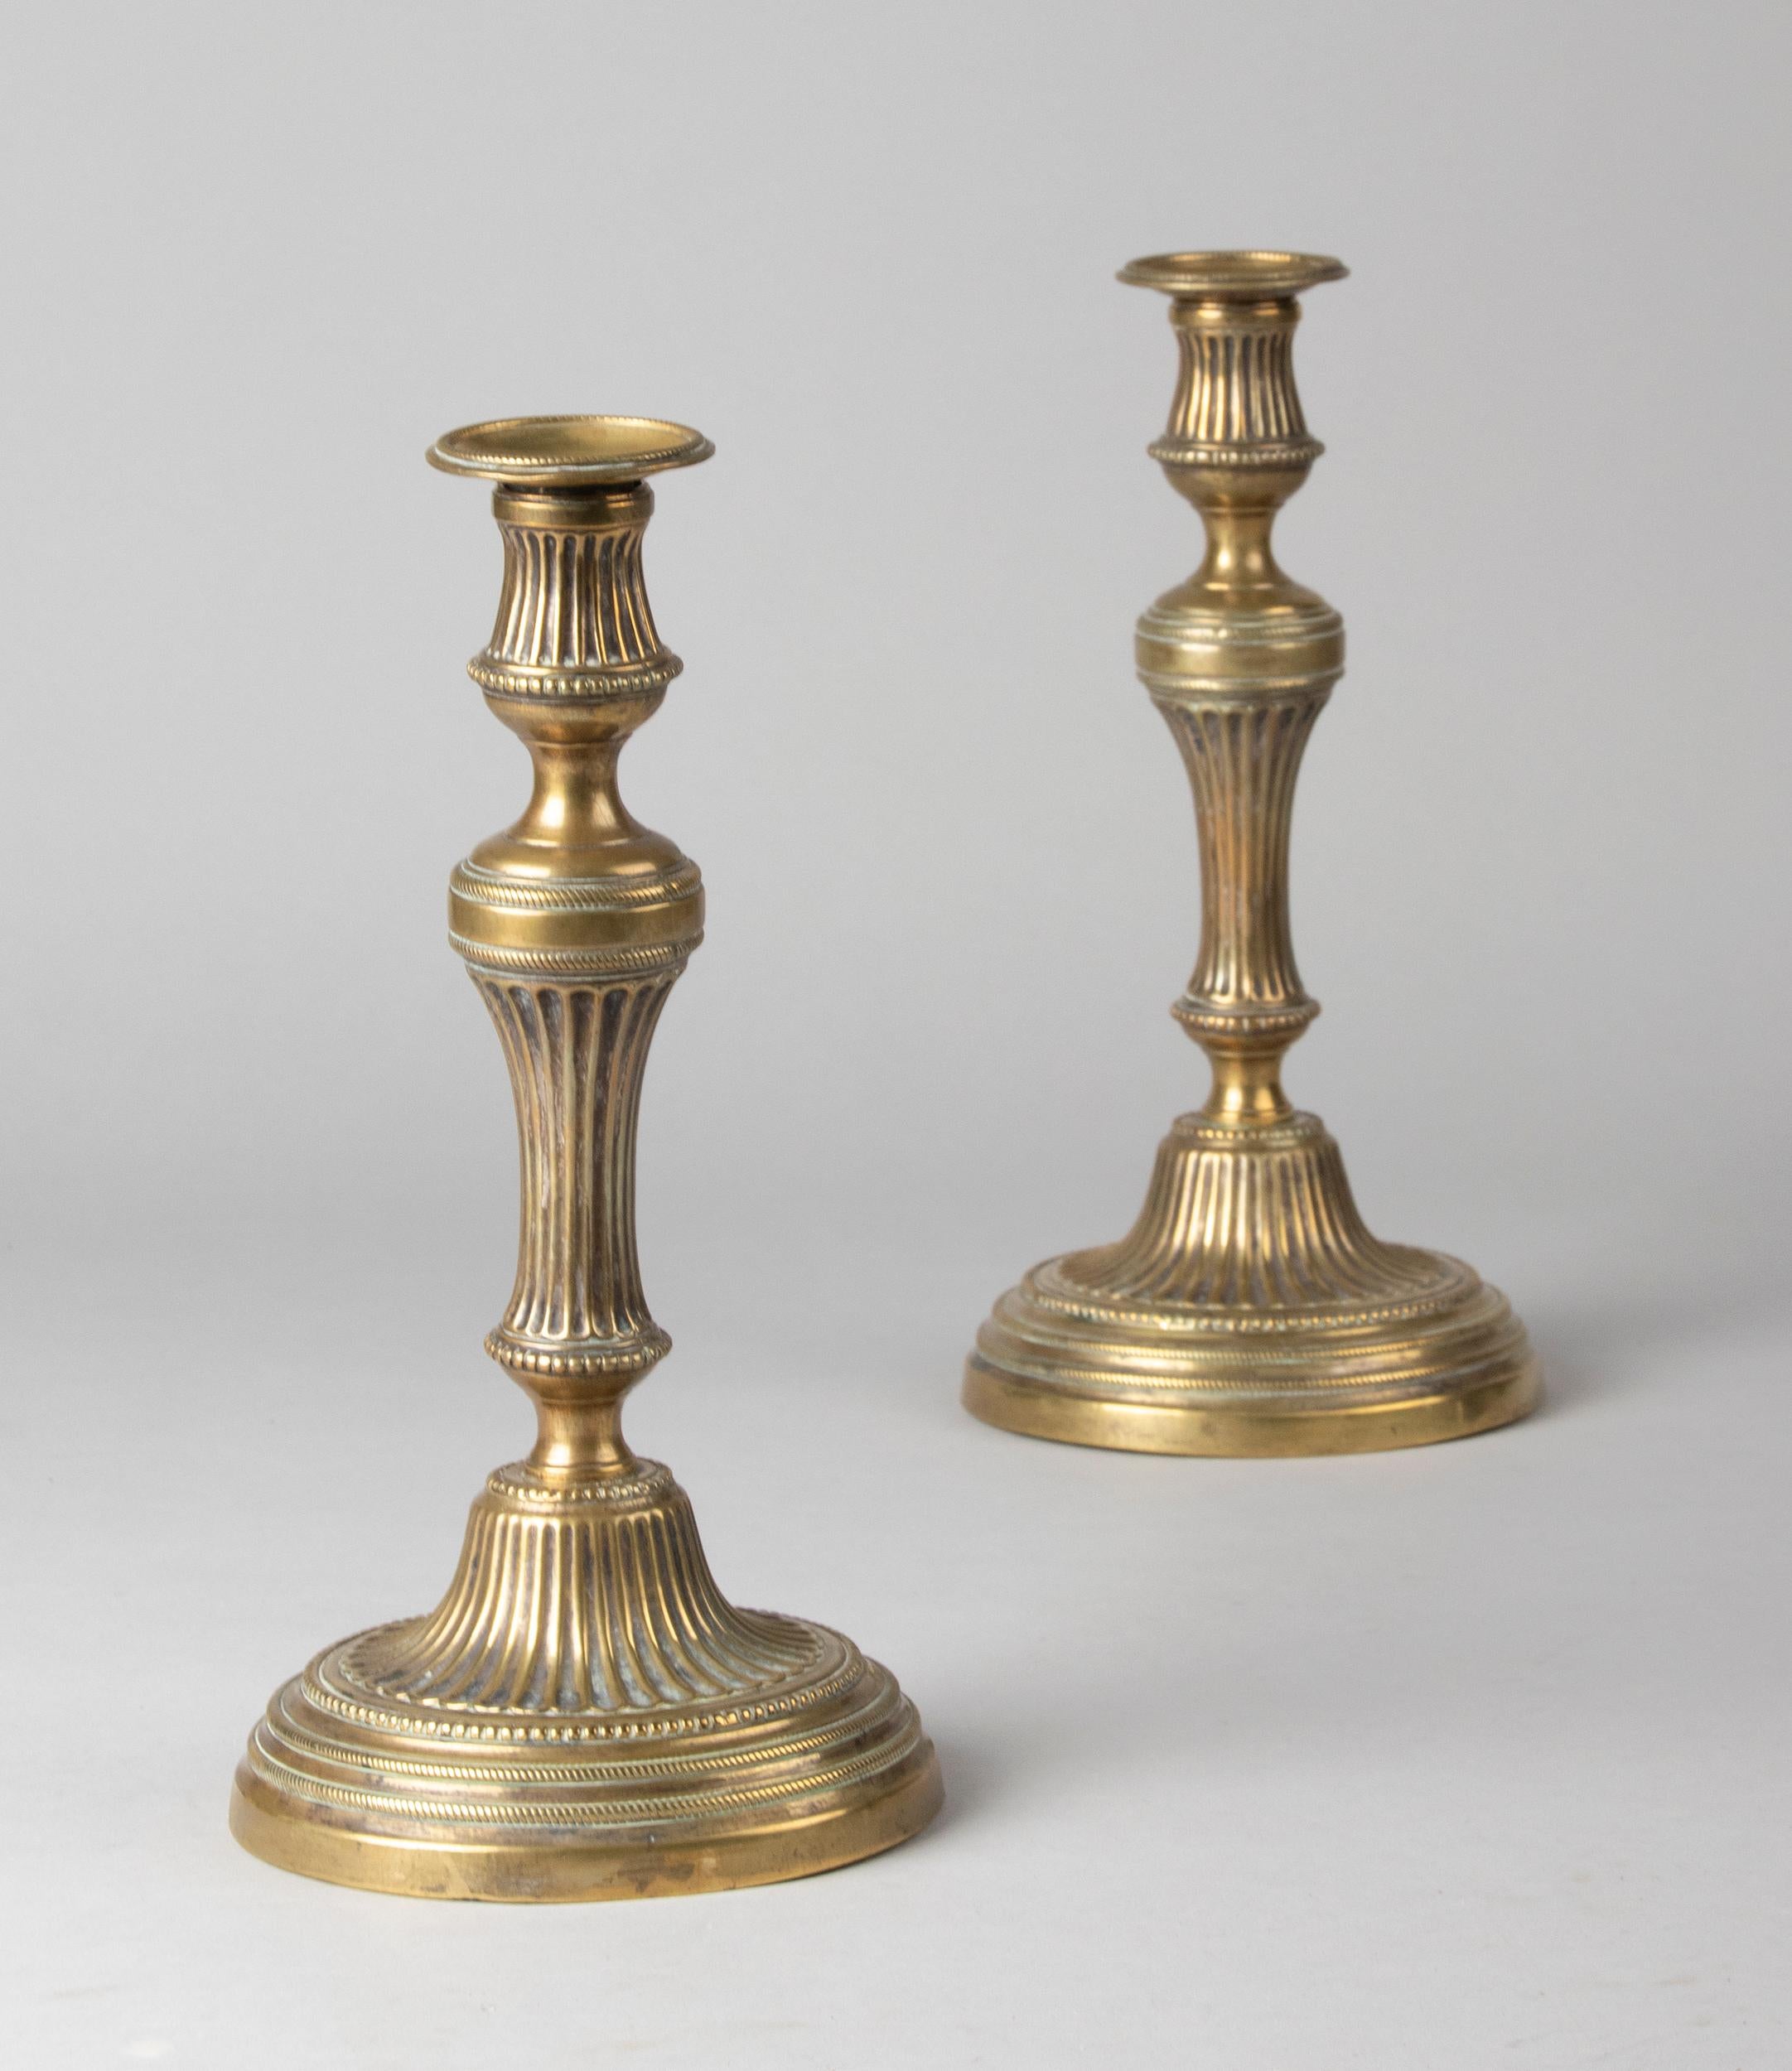 A beautiful pair of 19th century antique brass candlesticks. The candlesticks are decorated with canalures and ornate edges in Louis 16 style. They come from France and are in good condition. They are sturdy and stable.